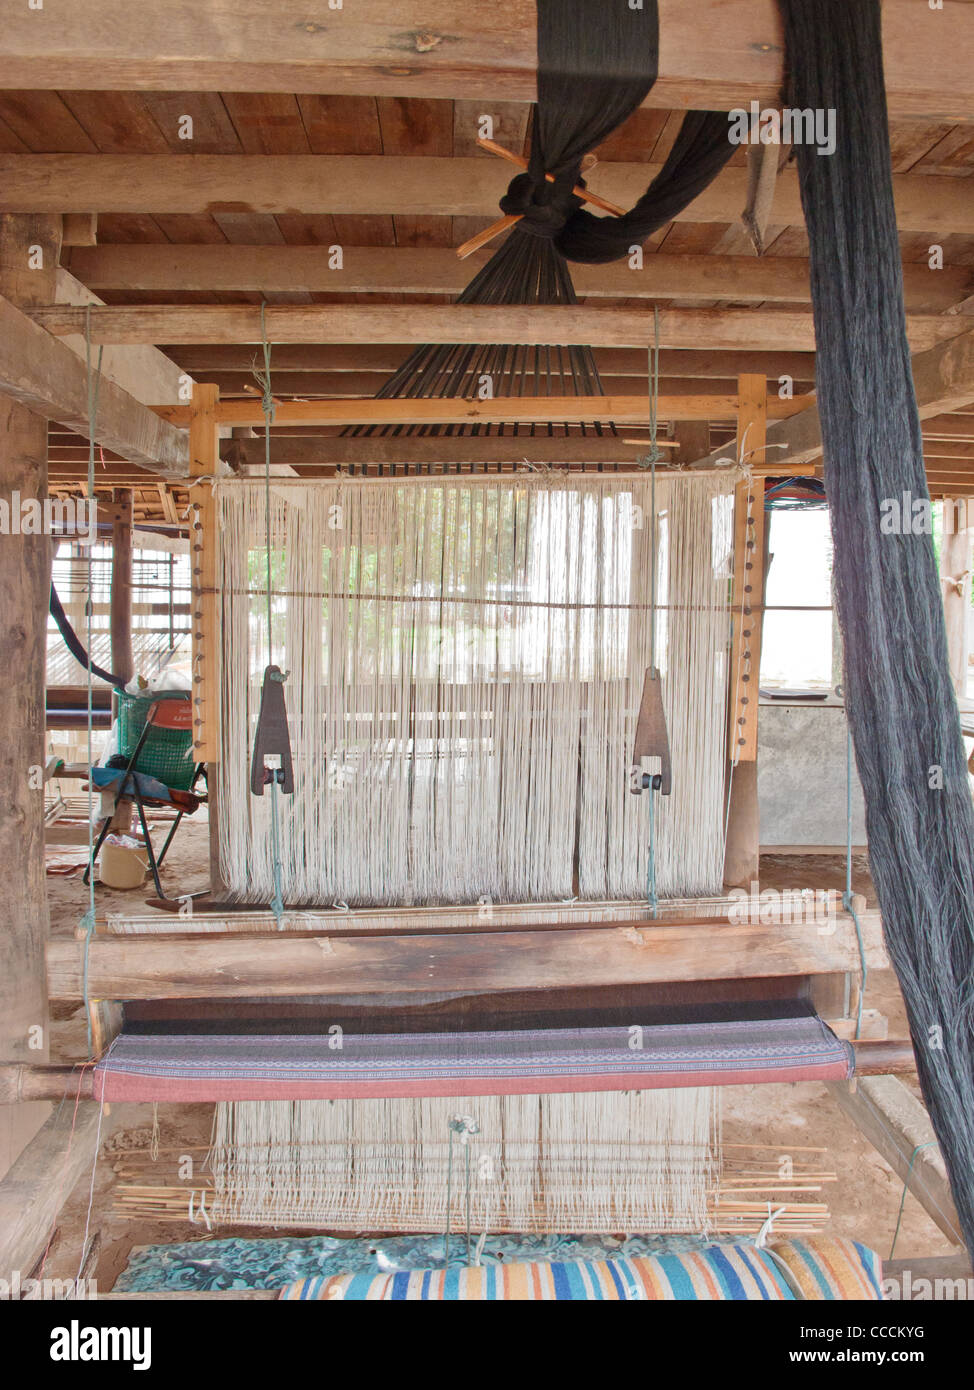 Traditional loom made of wood in the northern part of Thailand Stock Photo